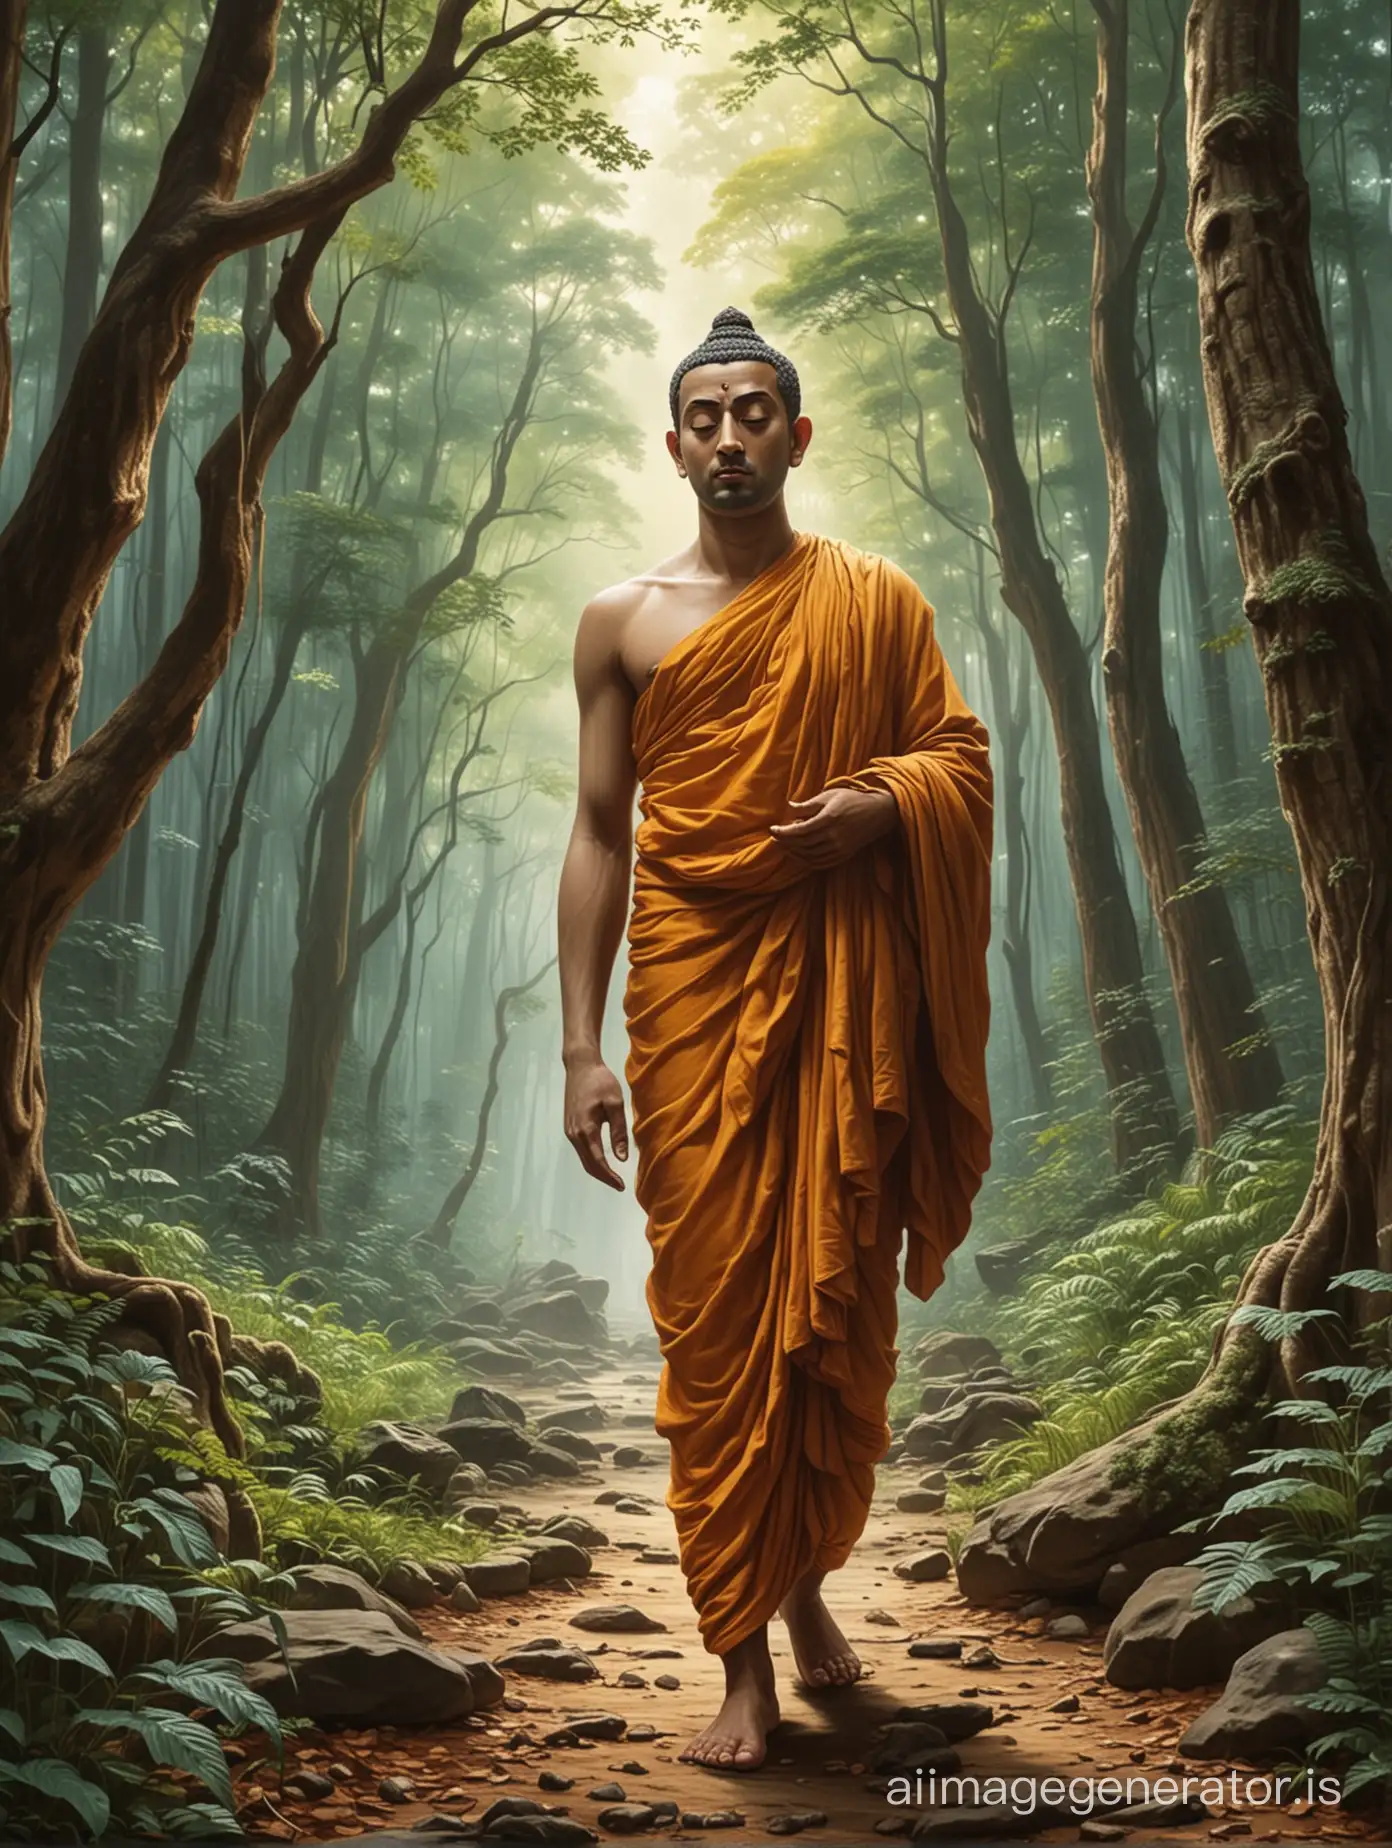 depiction of Siddhartha Gautama walking through the forest, deep in thought.